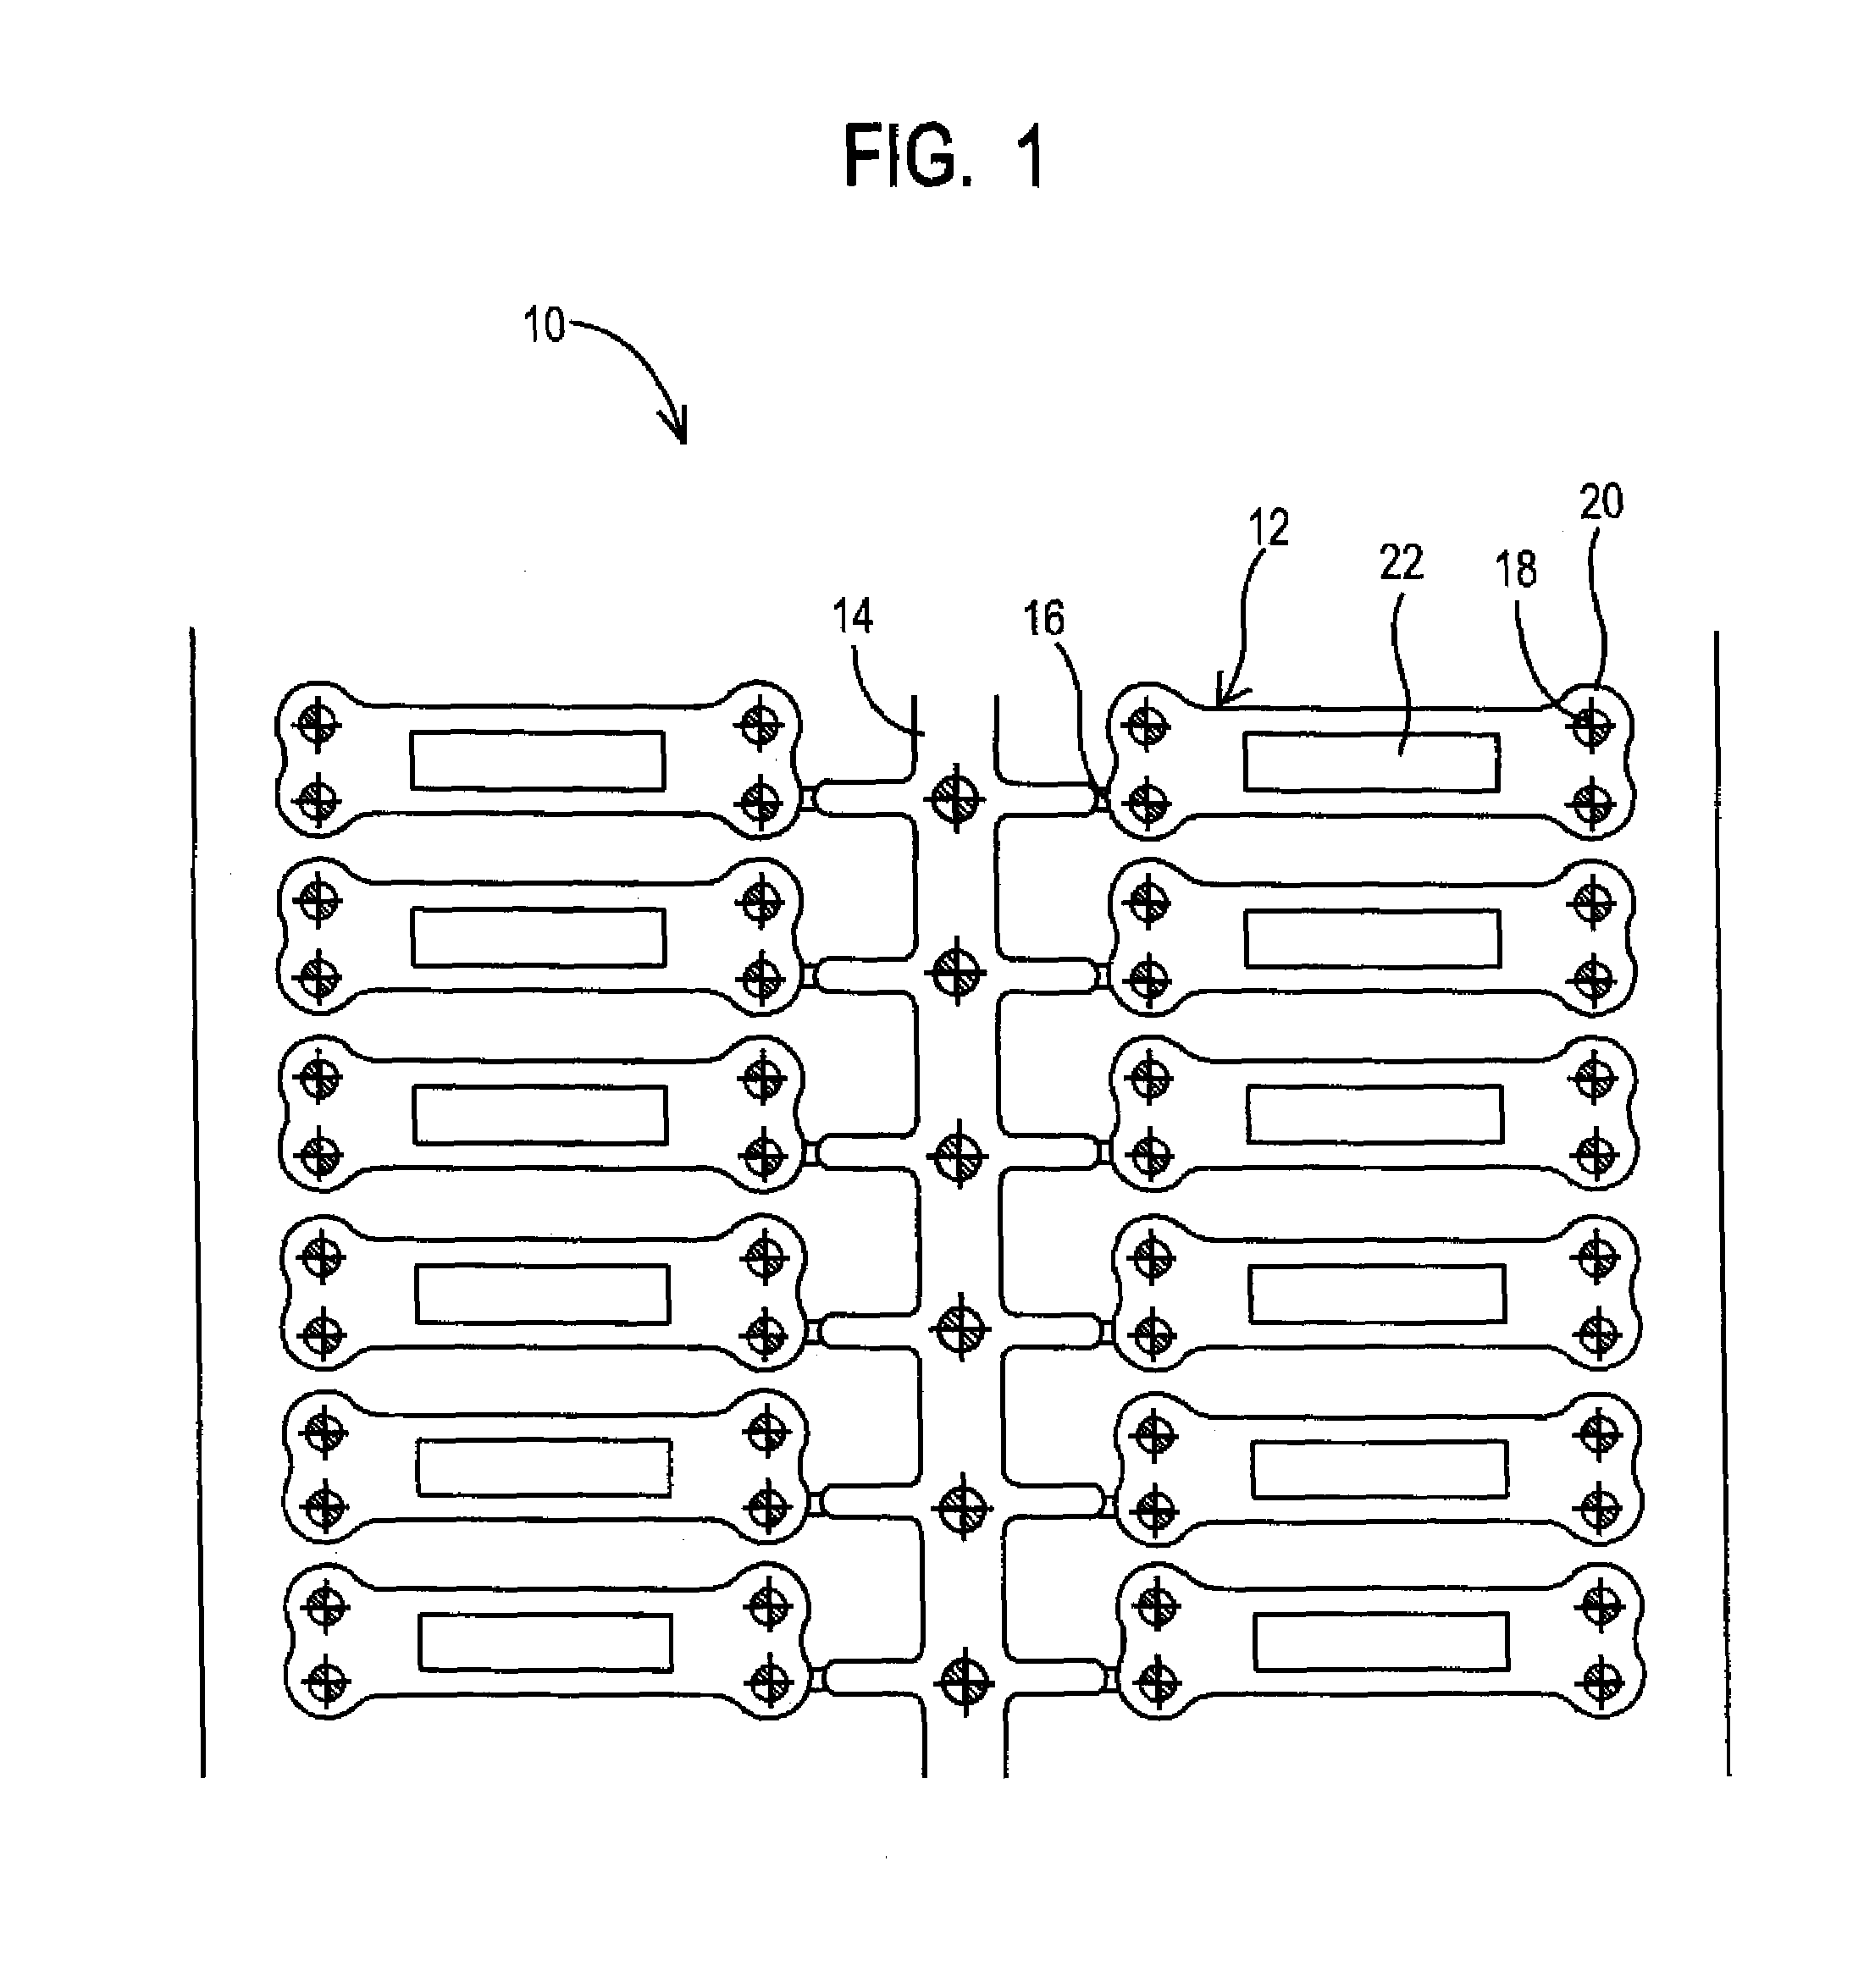 Method of removing molded natural resins from molds utilizing lifter bars